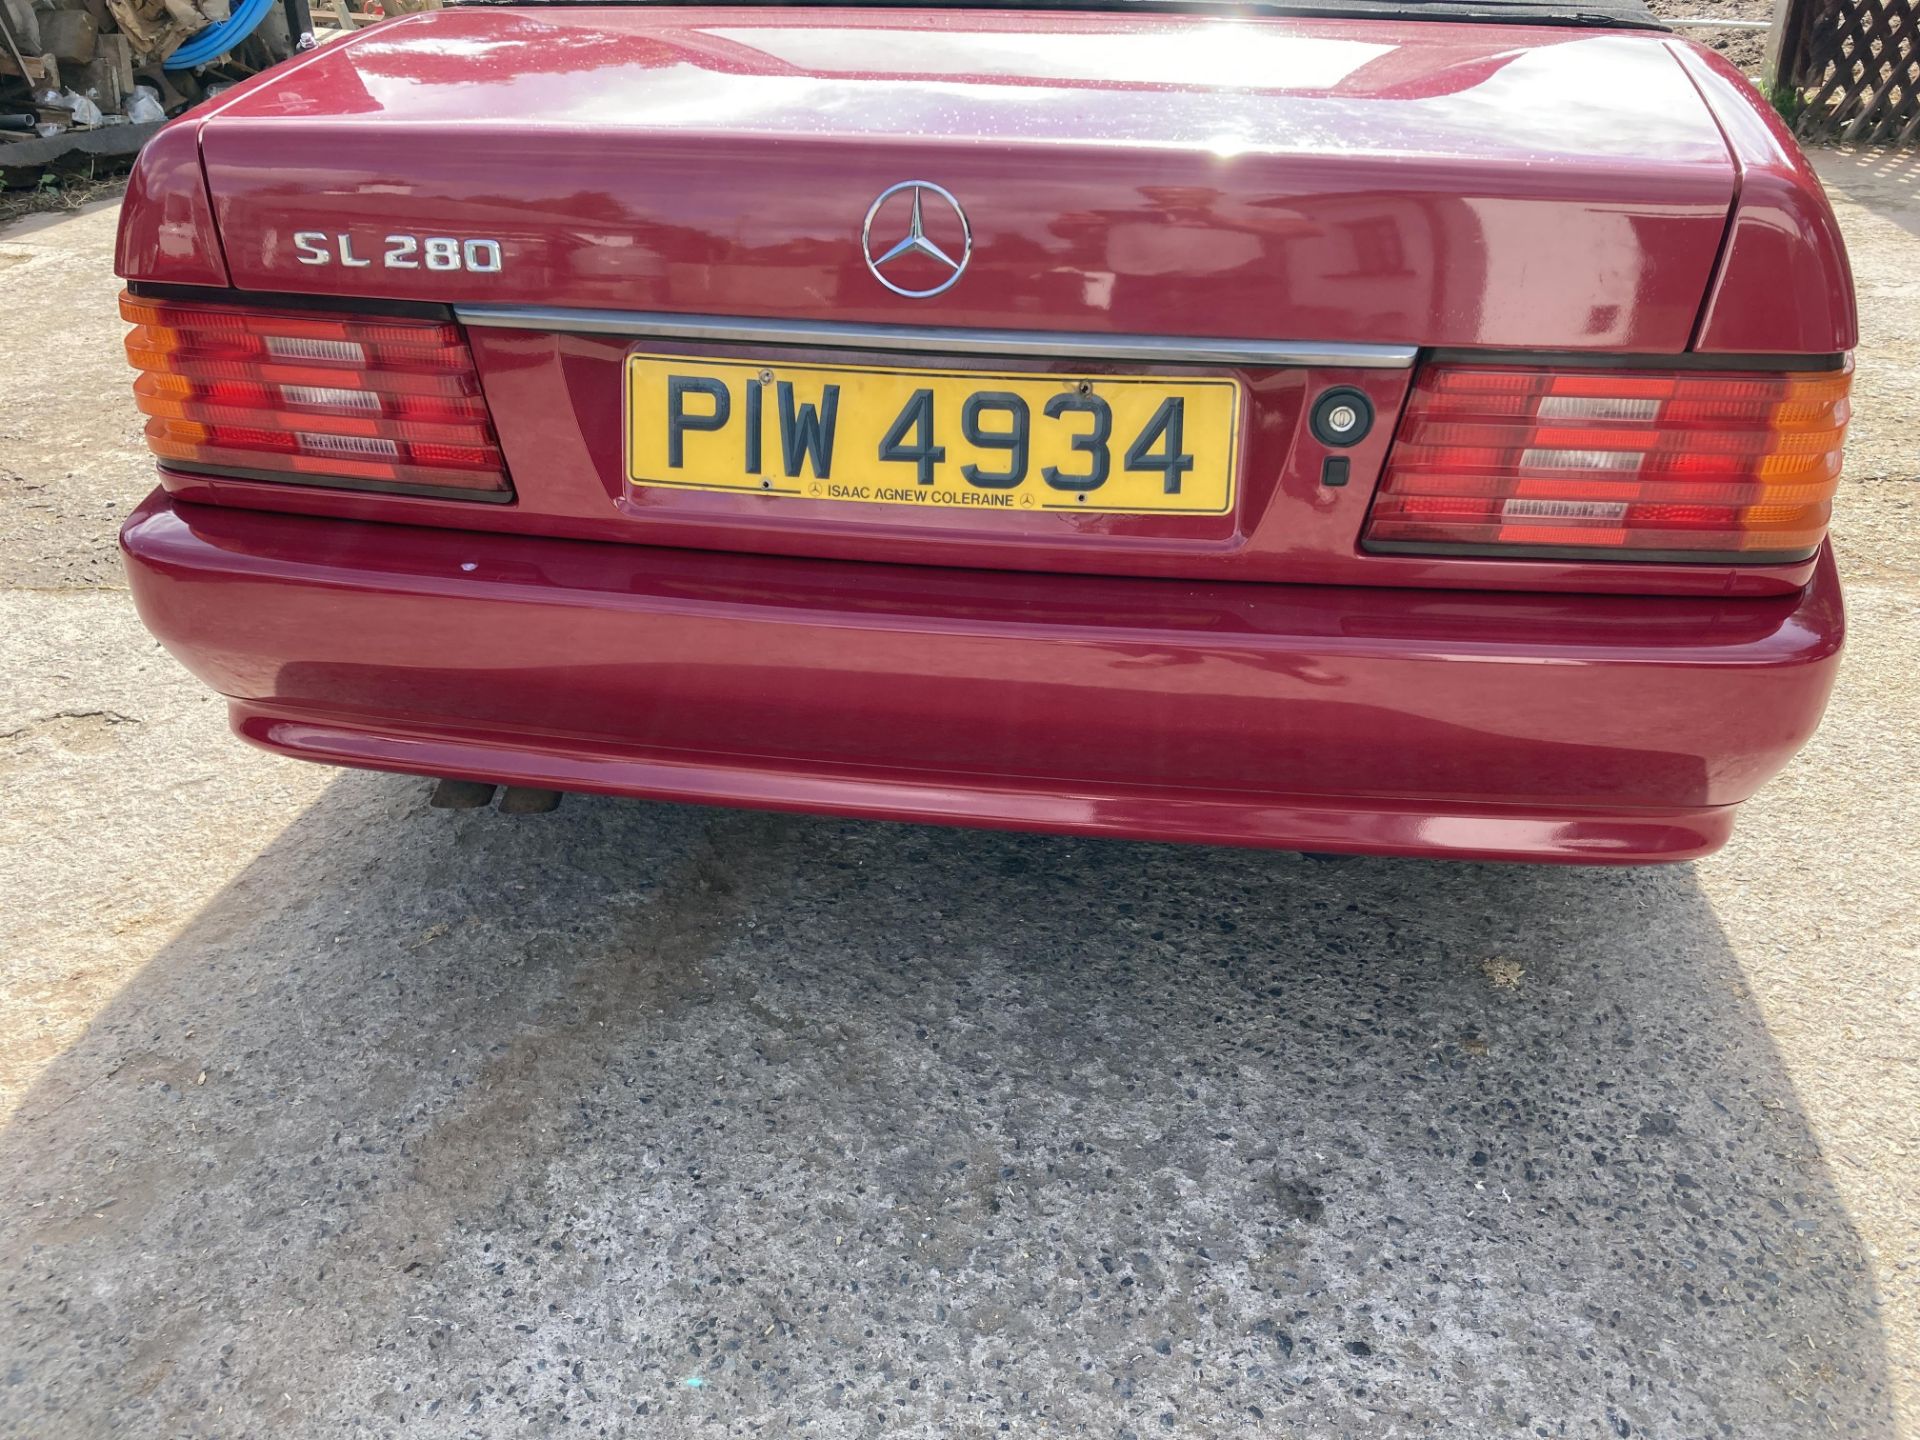 1994 MERCEDES SL 280 CLASSIC CAR LOW RESERVE.LOCATION NORTHERN IRELAND. - Image 3 of 8